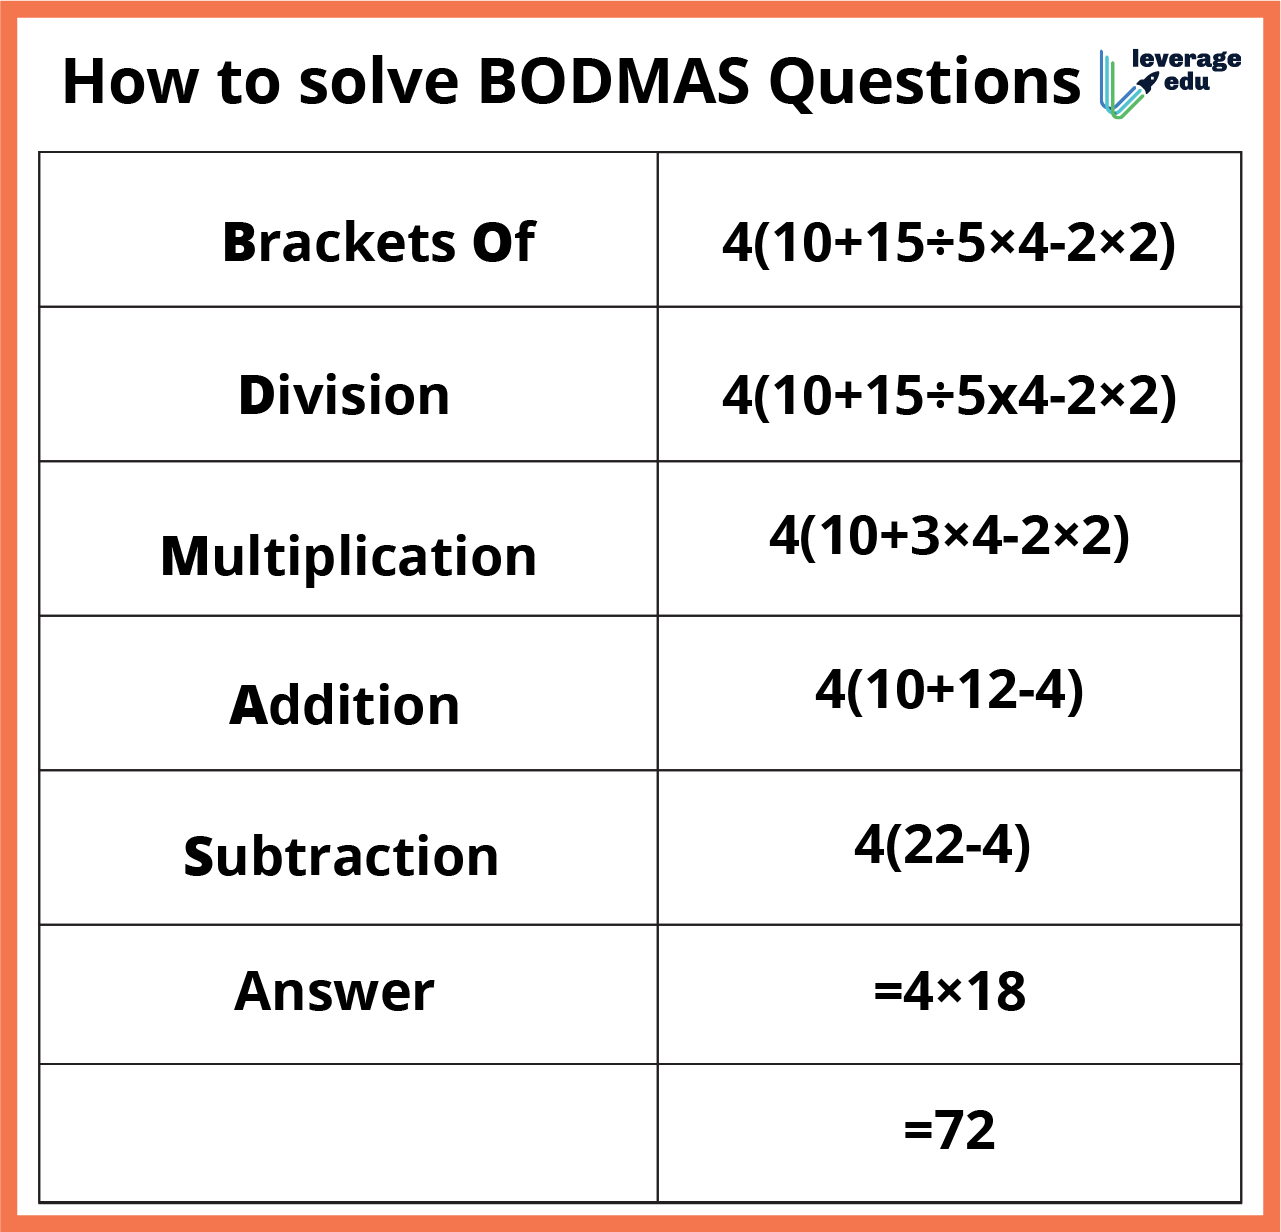 bodmas-questions-top-education-news-feed-in-nigeria-today